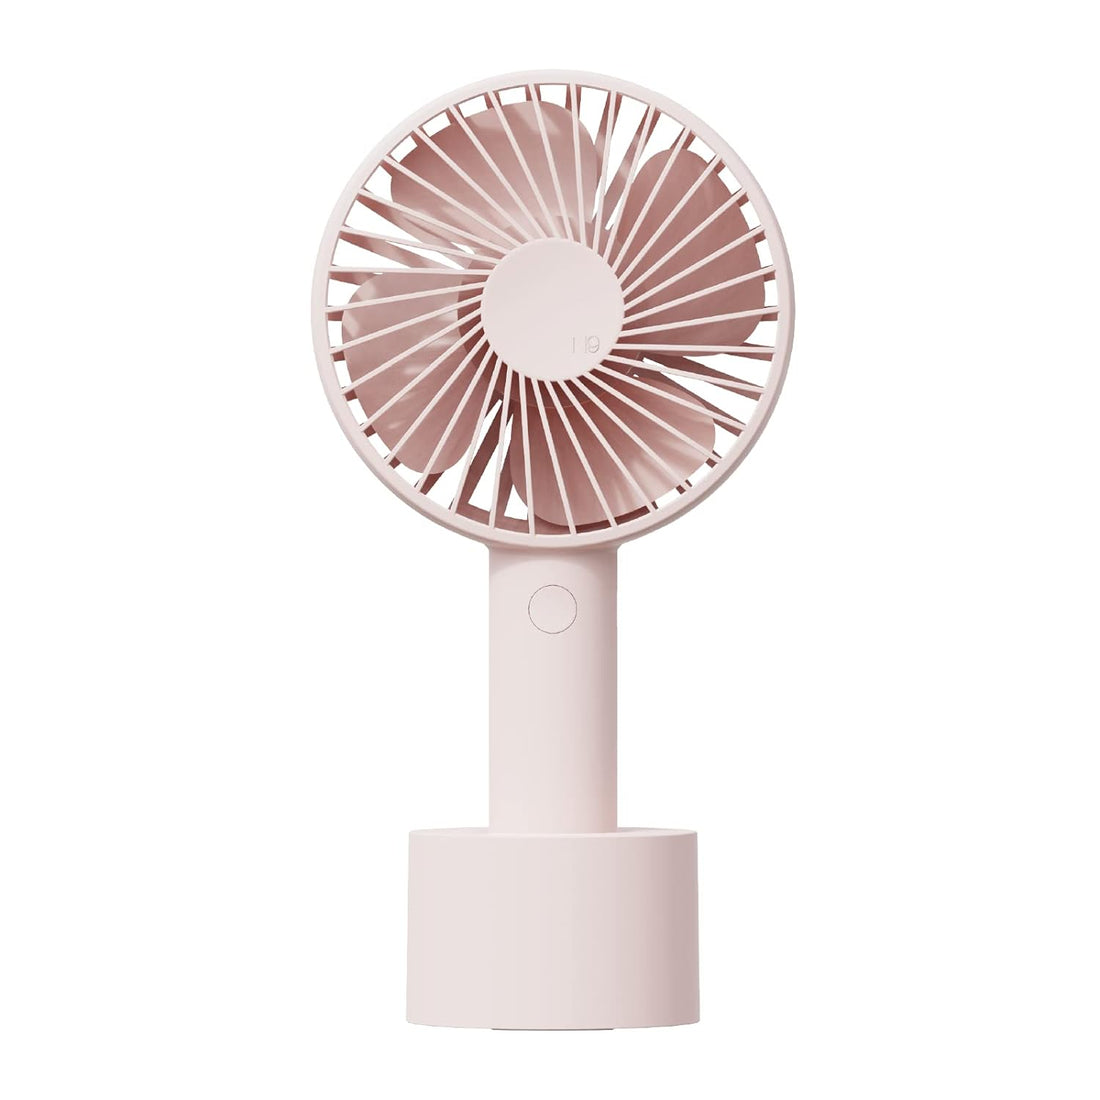 AISOLOVE Handheld Fan, Portable Fan with Fan Stand, USB Rechargeable Personal Fan with 3 Speed for Travel, Outdoor, Indoor, Commute, Office-Pink